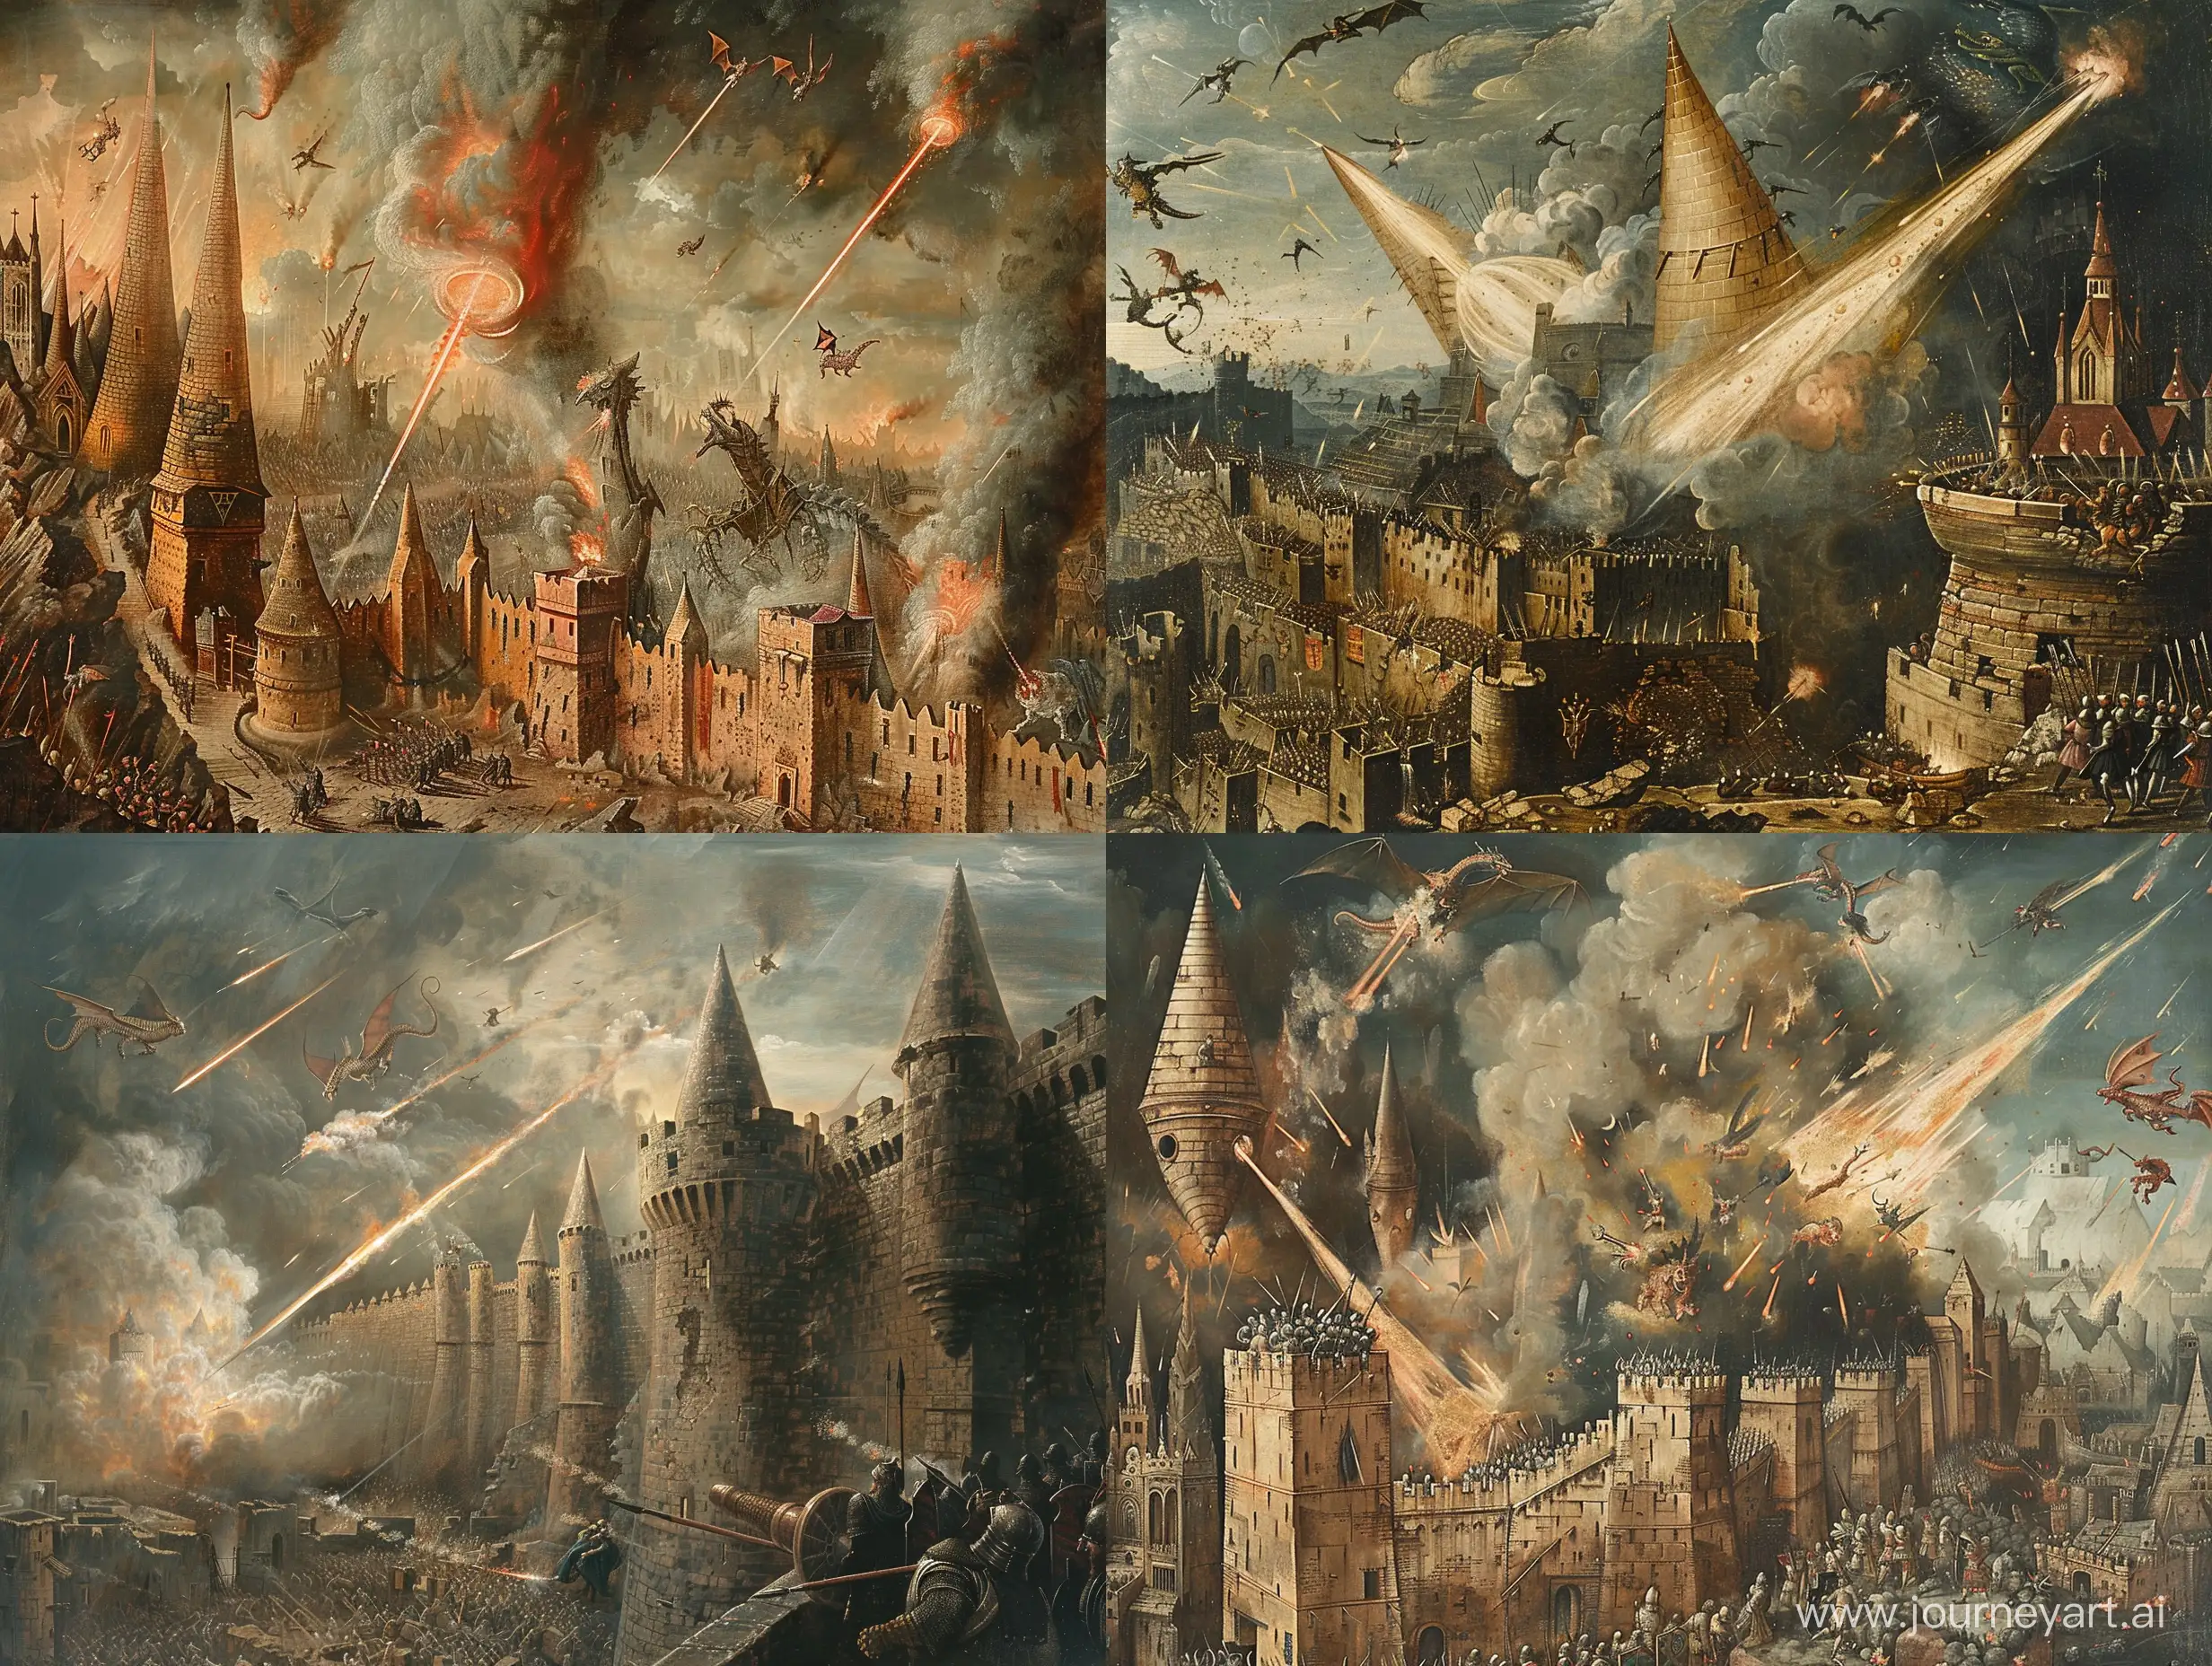 Epic-Battle-Medieval-Army-Assaults-City-Walls-with-Giant-Cannon-Rays